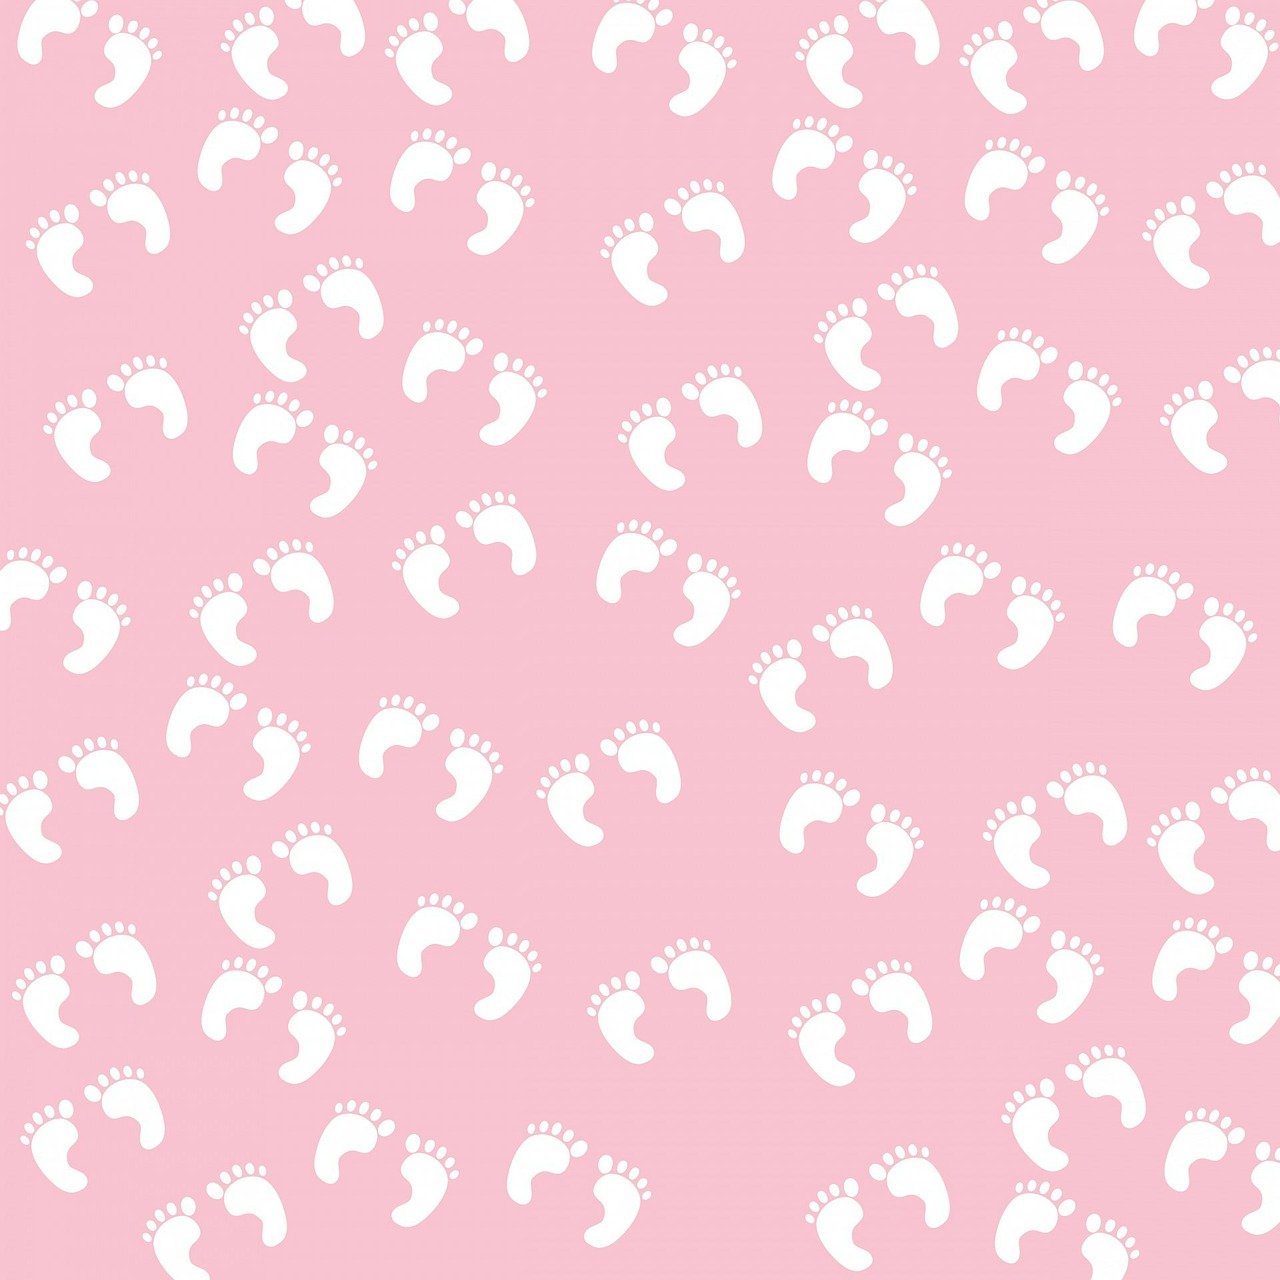 a pattern of footprints on a pink background, a digital rendering, inspired by Kōno Bairei, 15081959 21121991 01012000 4k, fetus, made in adobe illustrator, soft white rubber